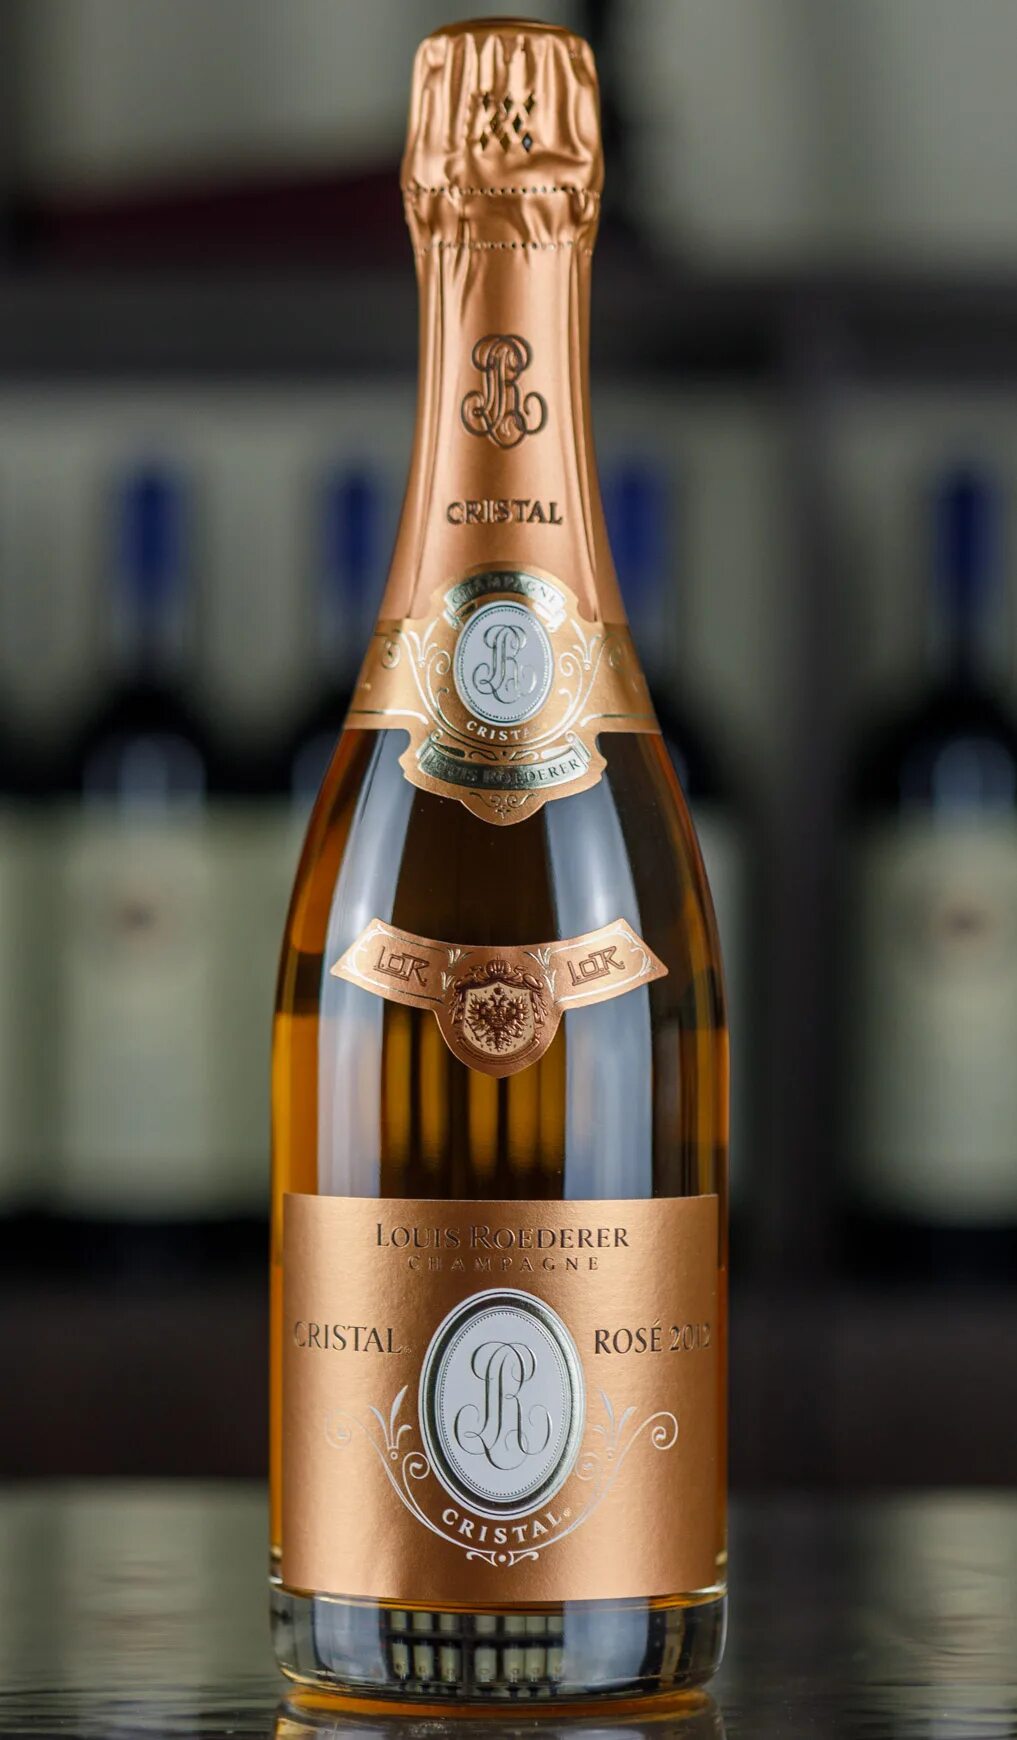 Шампанское кристалл. Луи Родерер Кристалл. Louis Roederer Cristal 2012. Crystal Rose Champagne Louis Roederer. Louis Roederer Rose 2012.